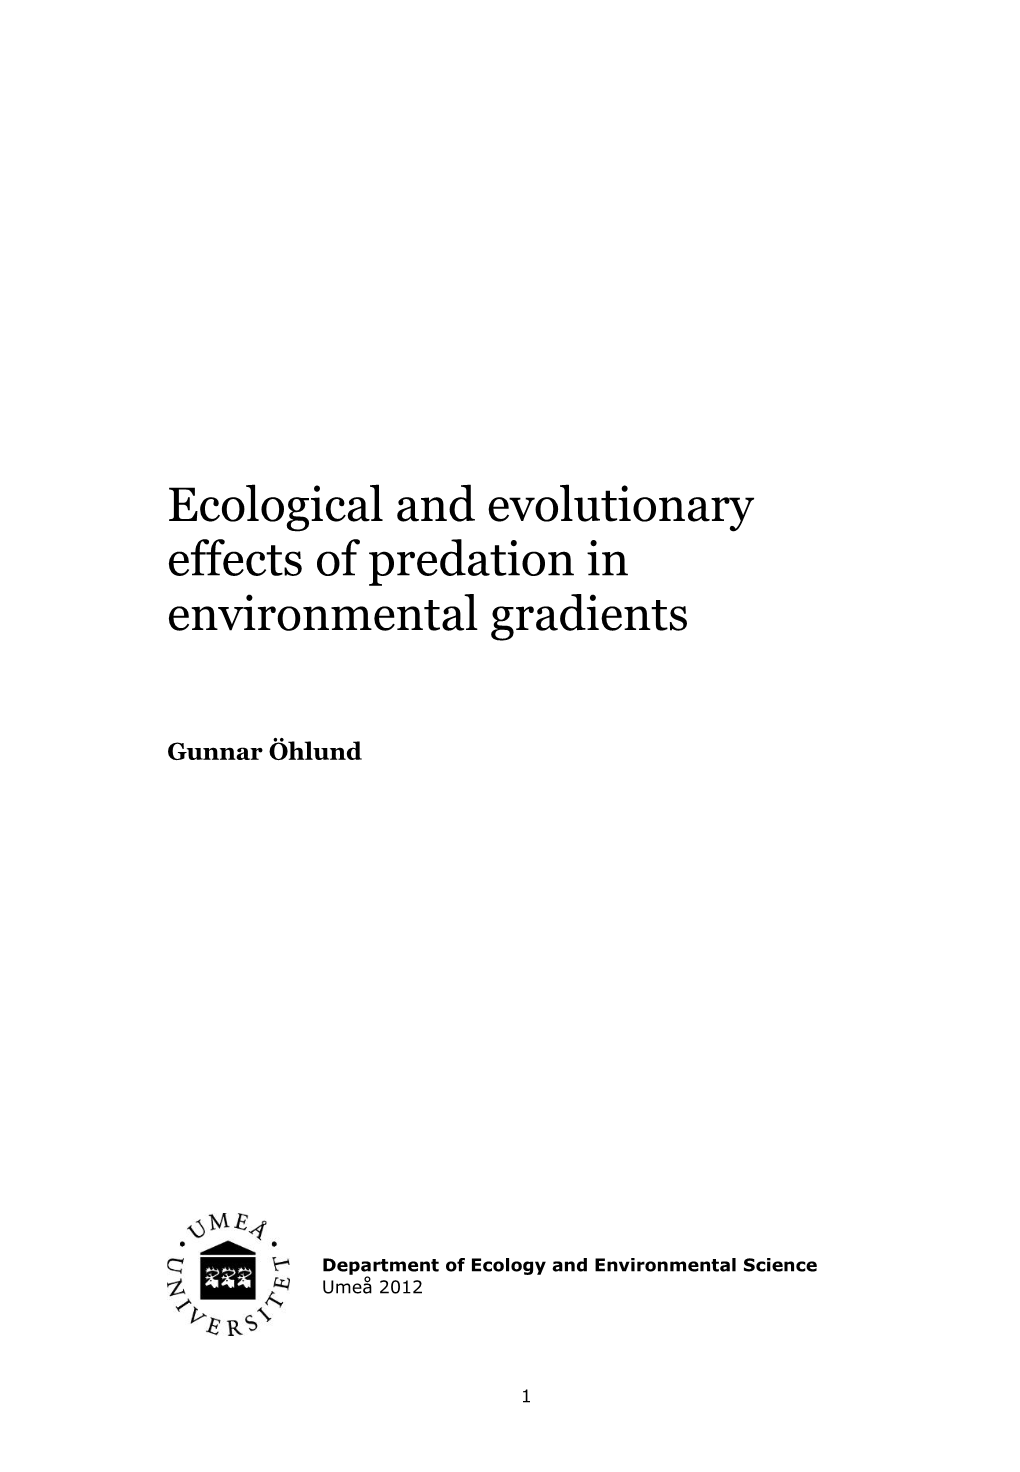 Ecological and Evolutionary Effects of Predation in Environmental Gradients